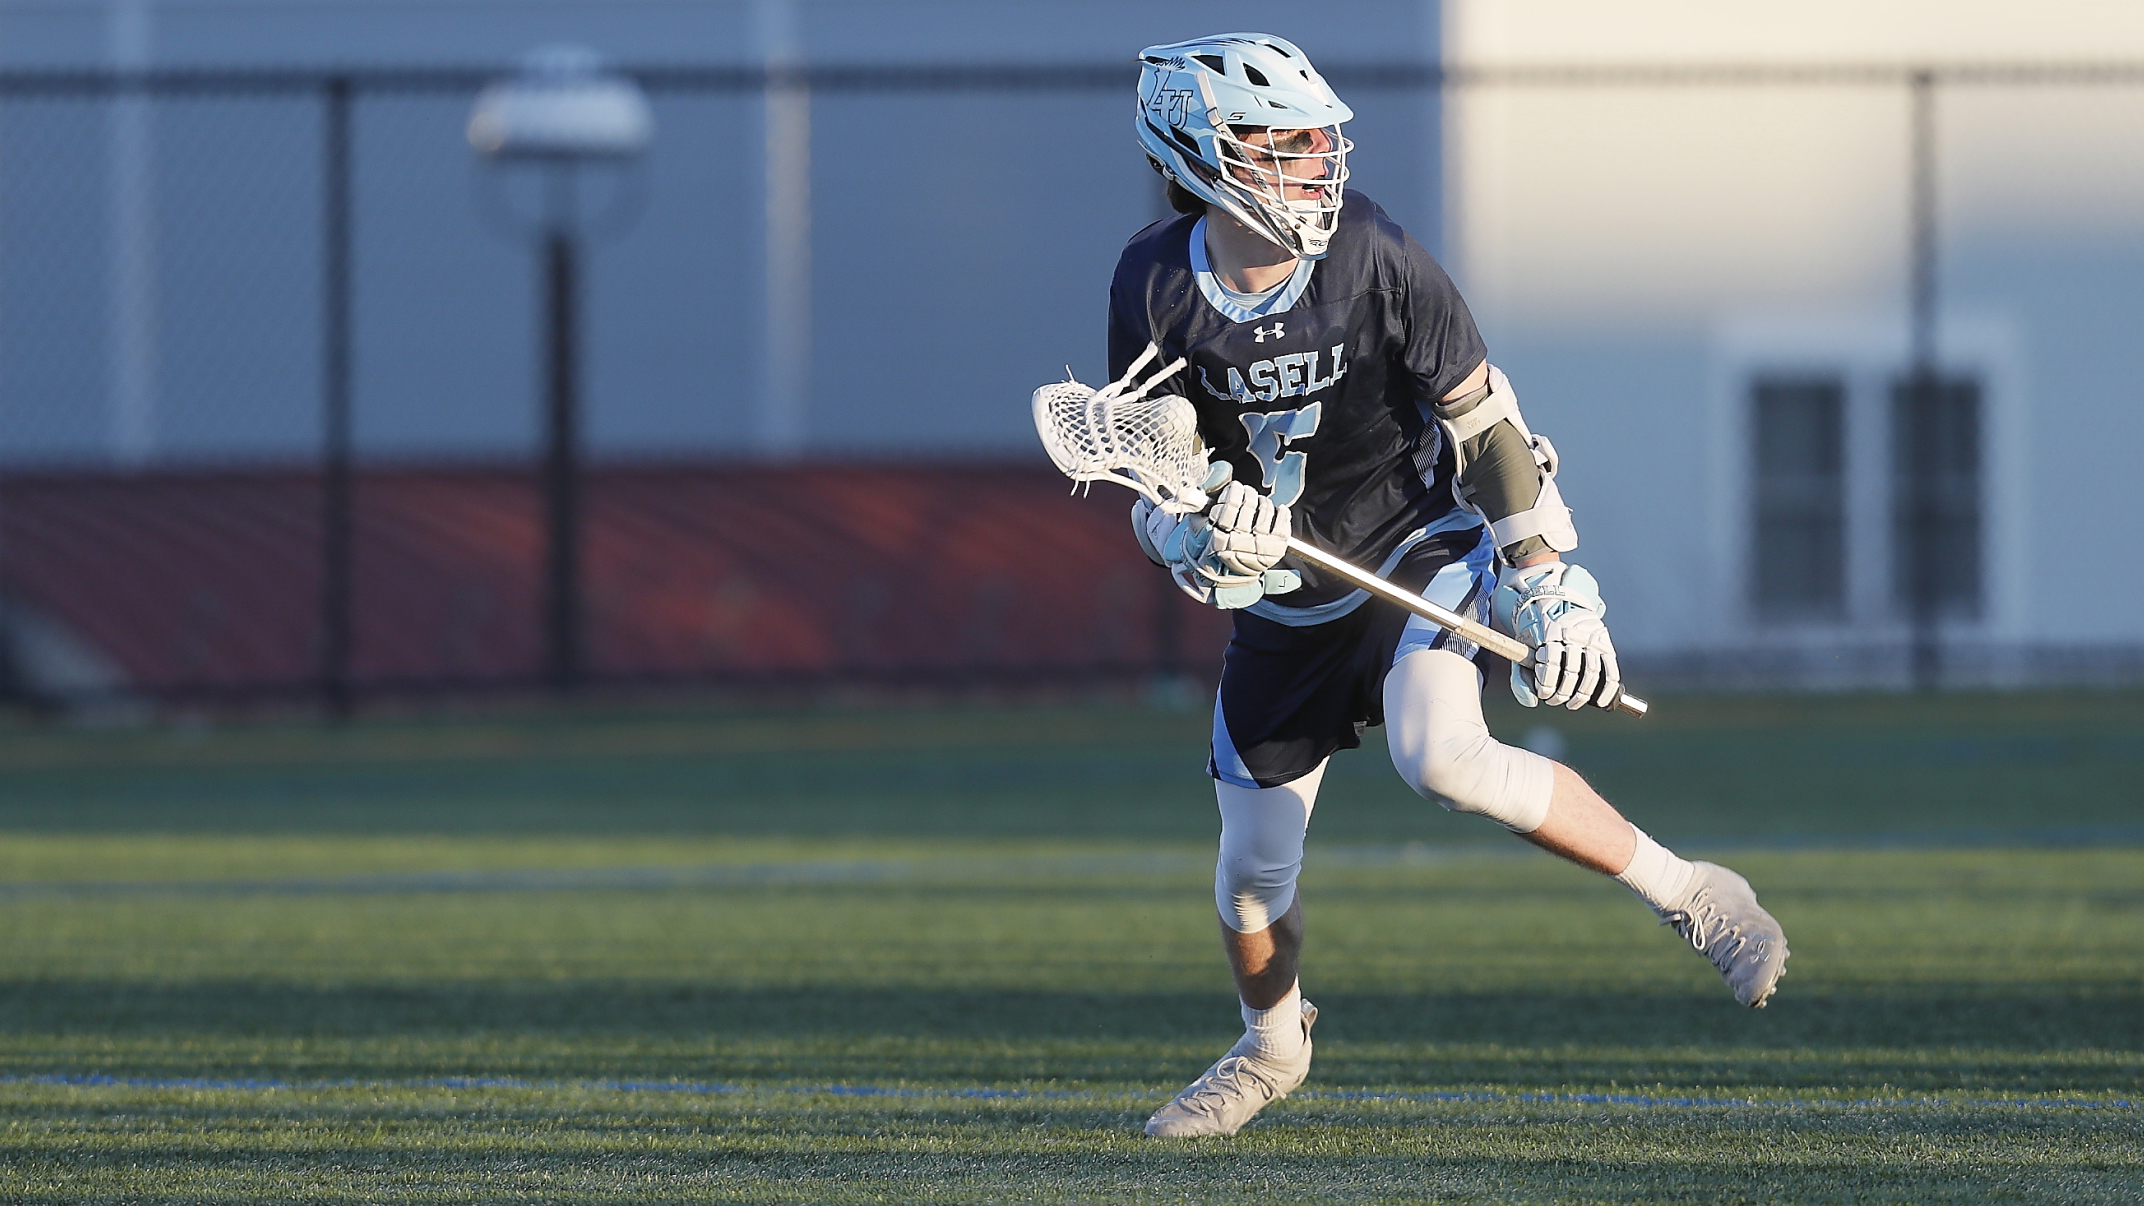 Men's Lacrosse: Defense shines as Lasers stay undefeated in the GNAC